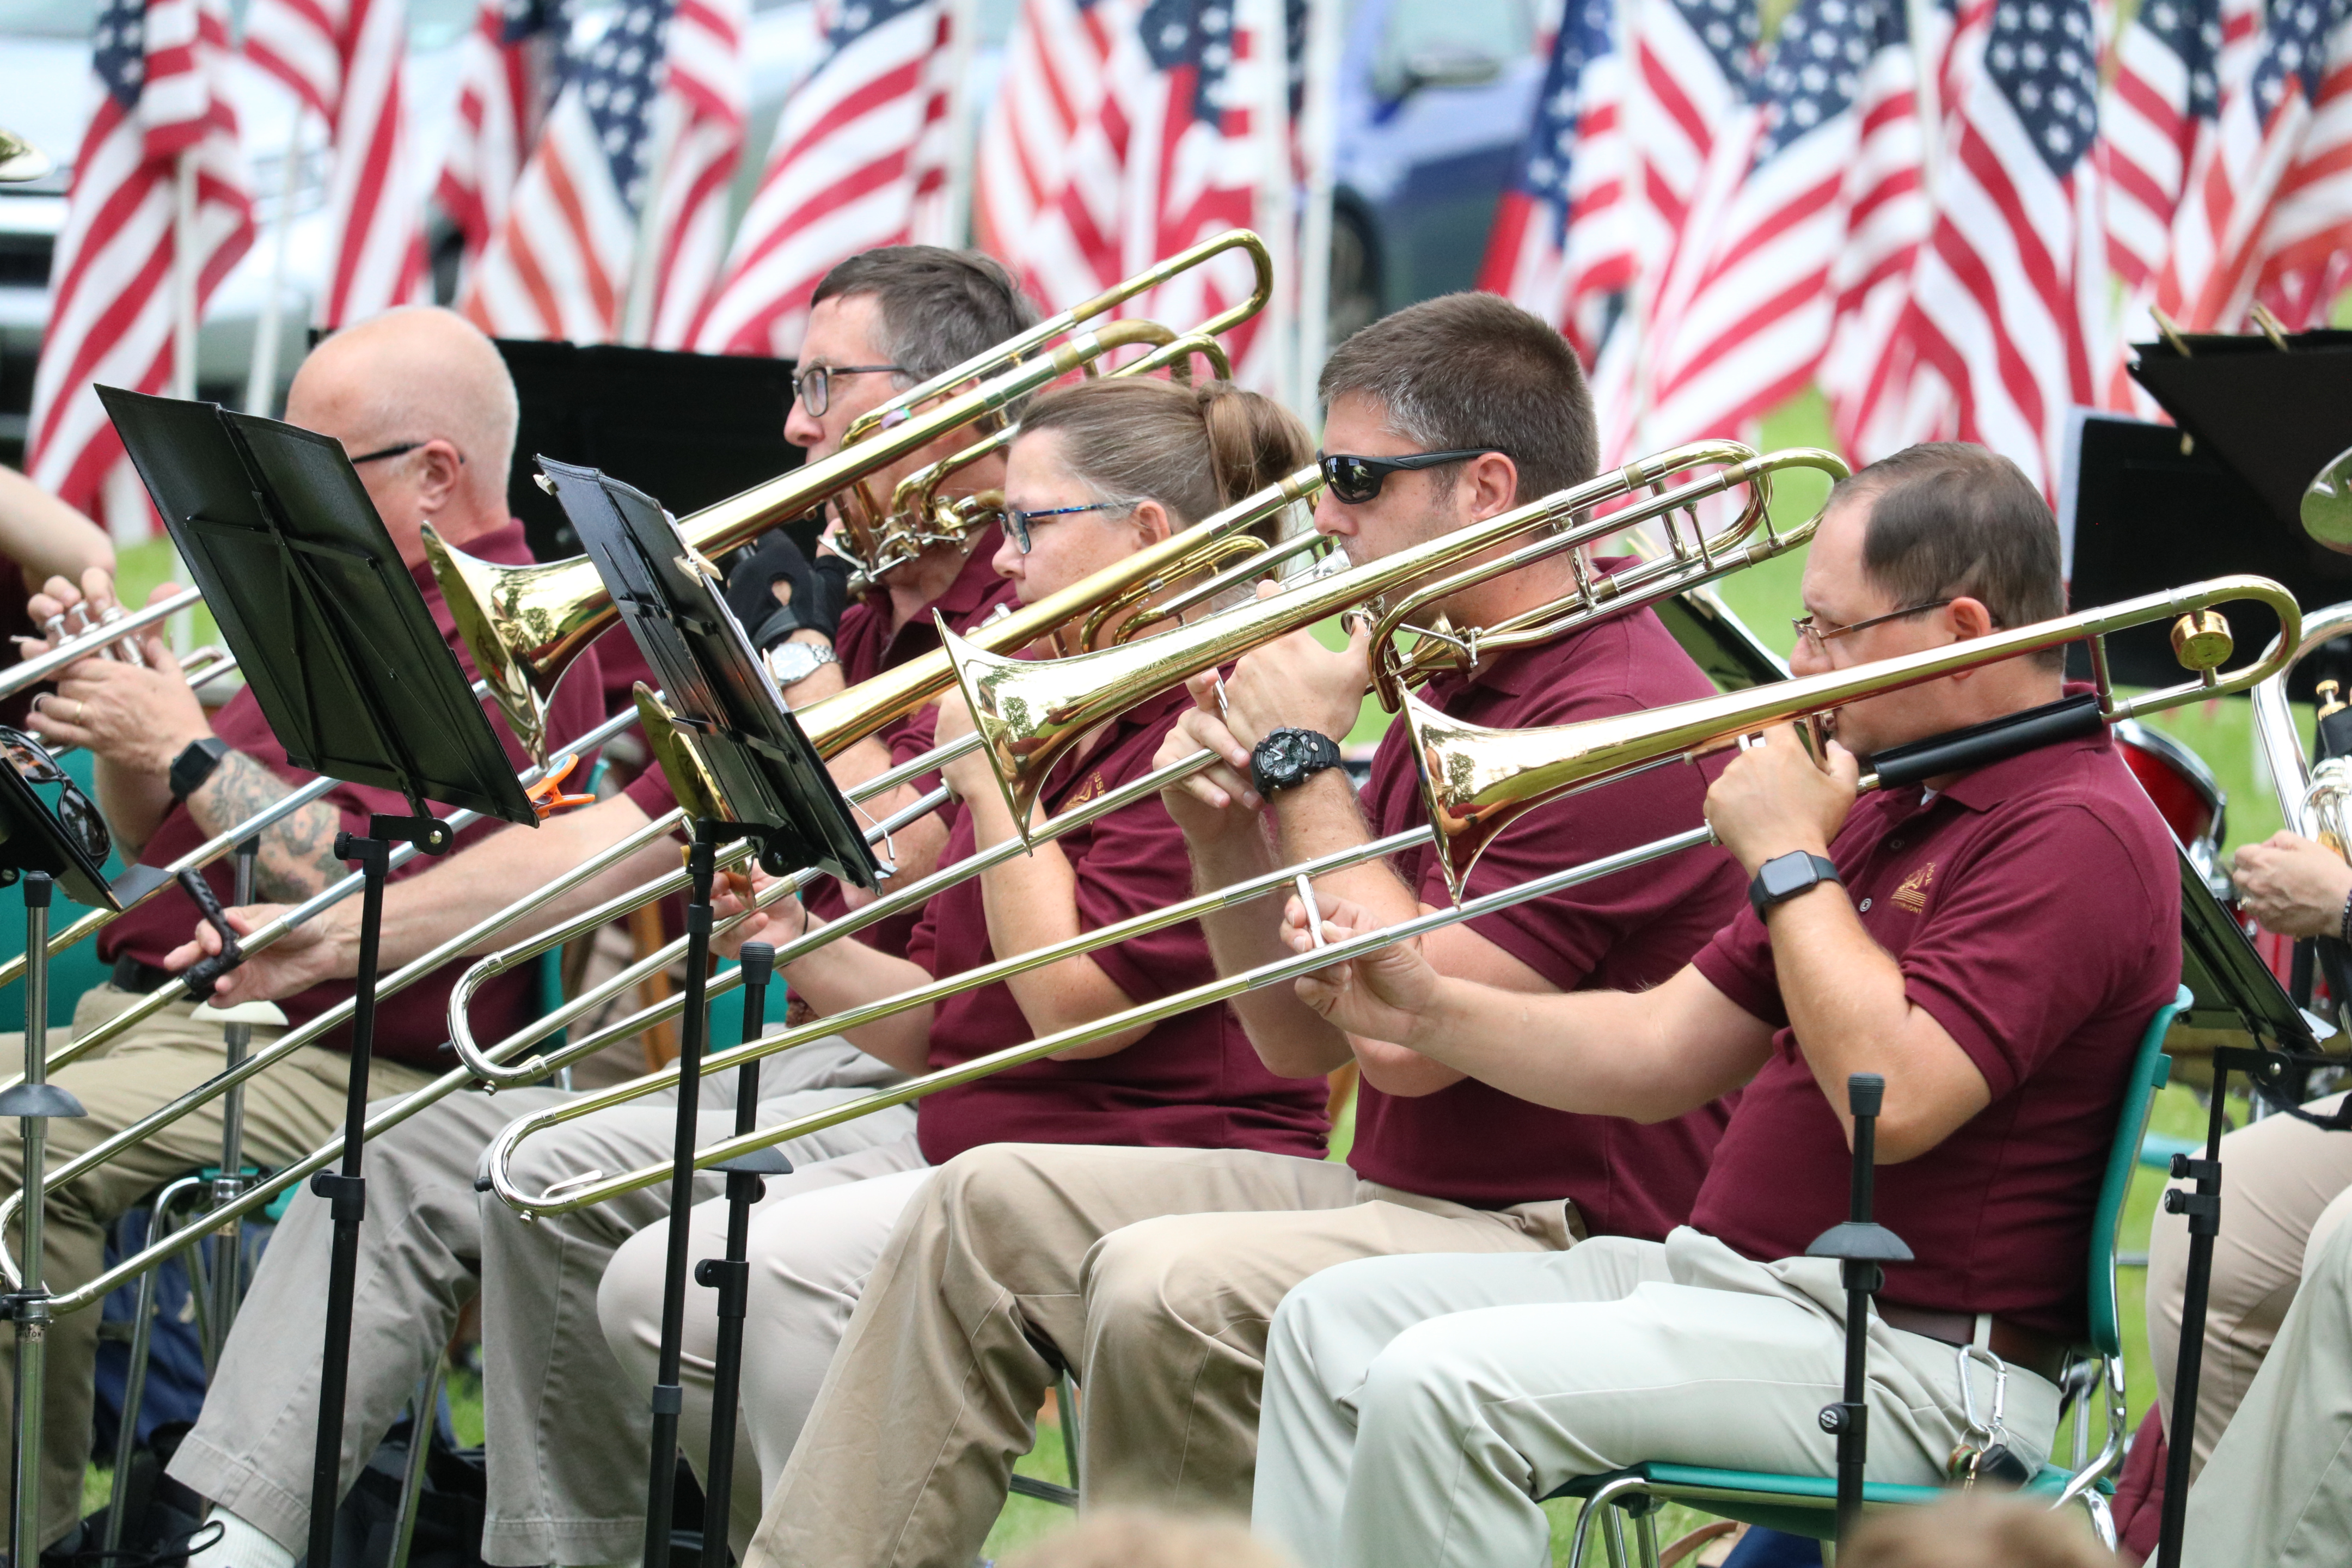 The Whitehouse Wind Symphony will perform as part of the festivities taking place at the Field of HonorⓇ at the Jacobus Vanderveer House in Bedminster.